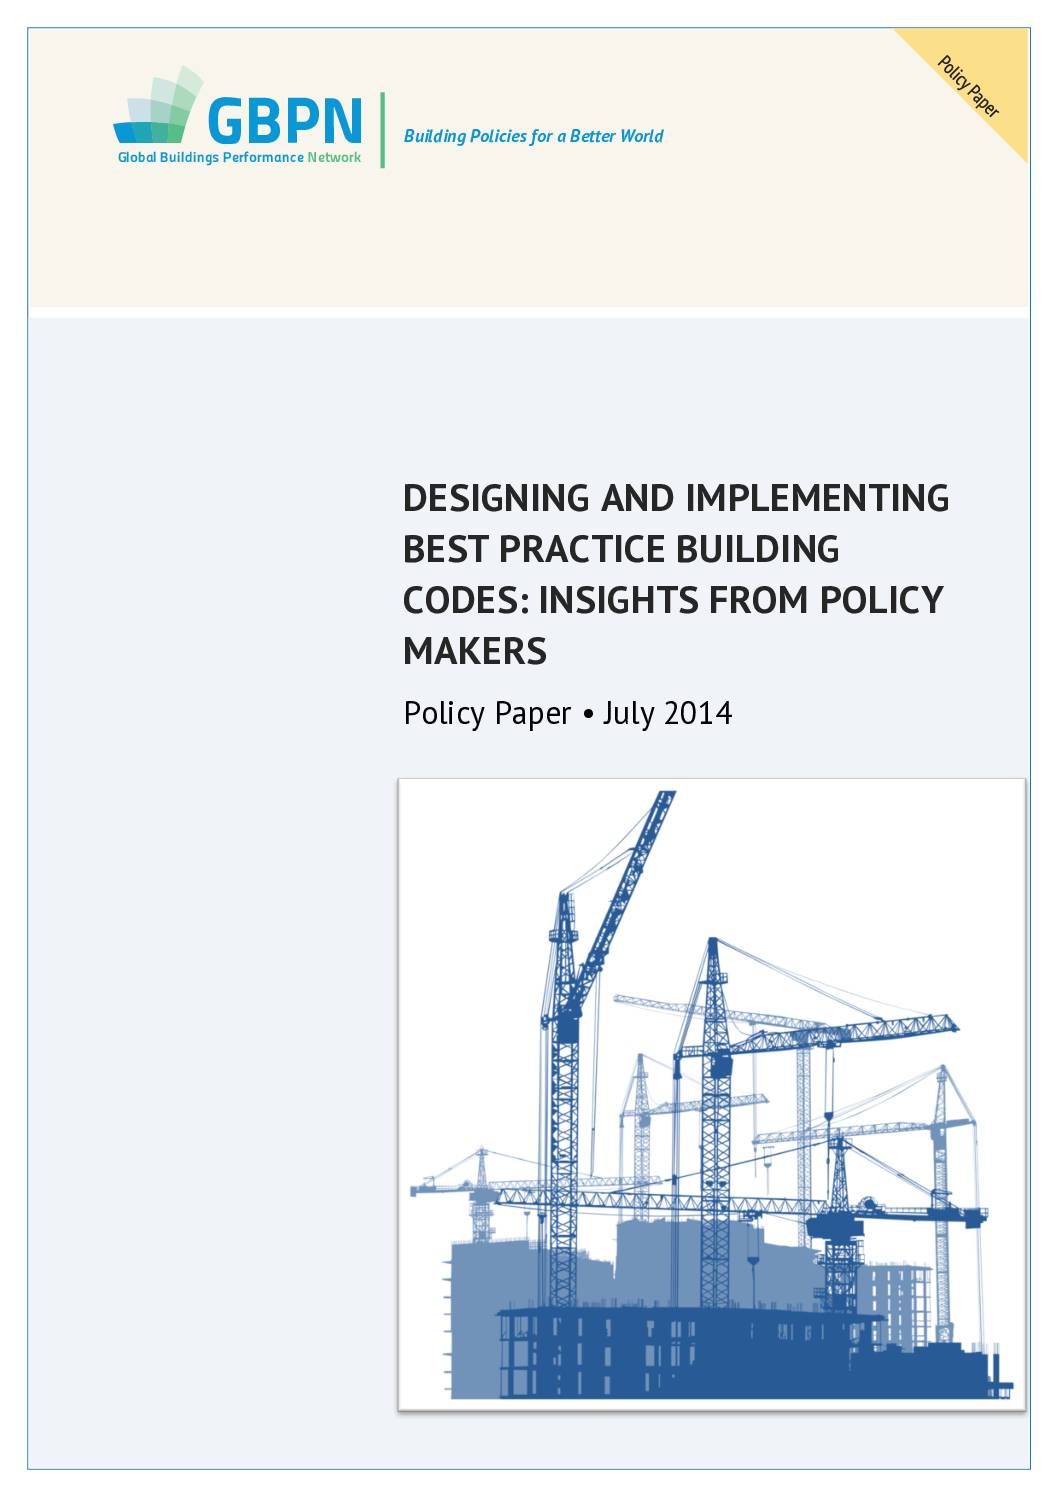 Designing and Implementing Best Practice Building Codes: Insights from Policy Makers